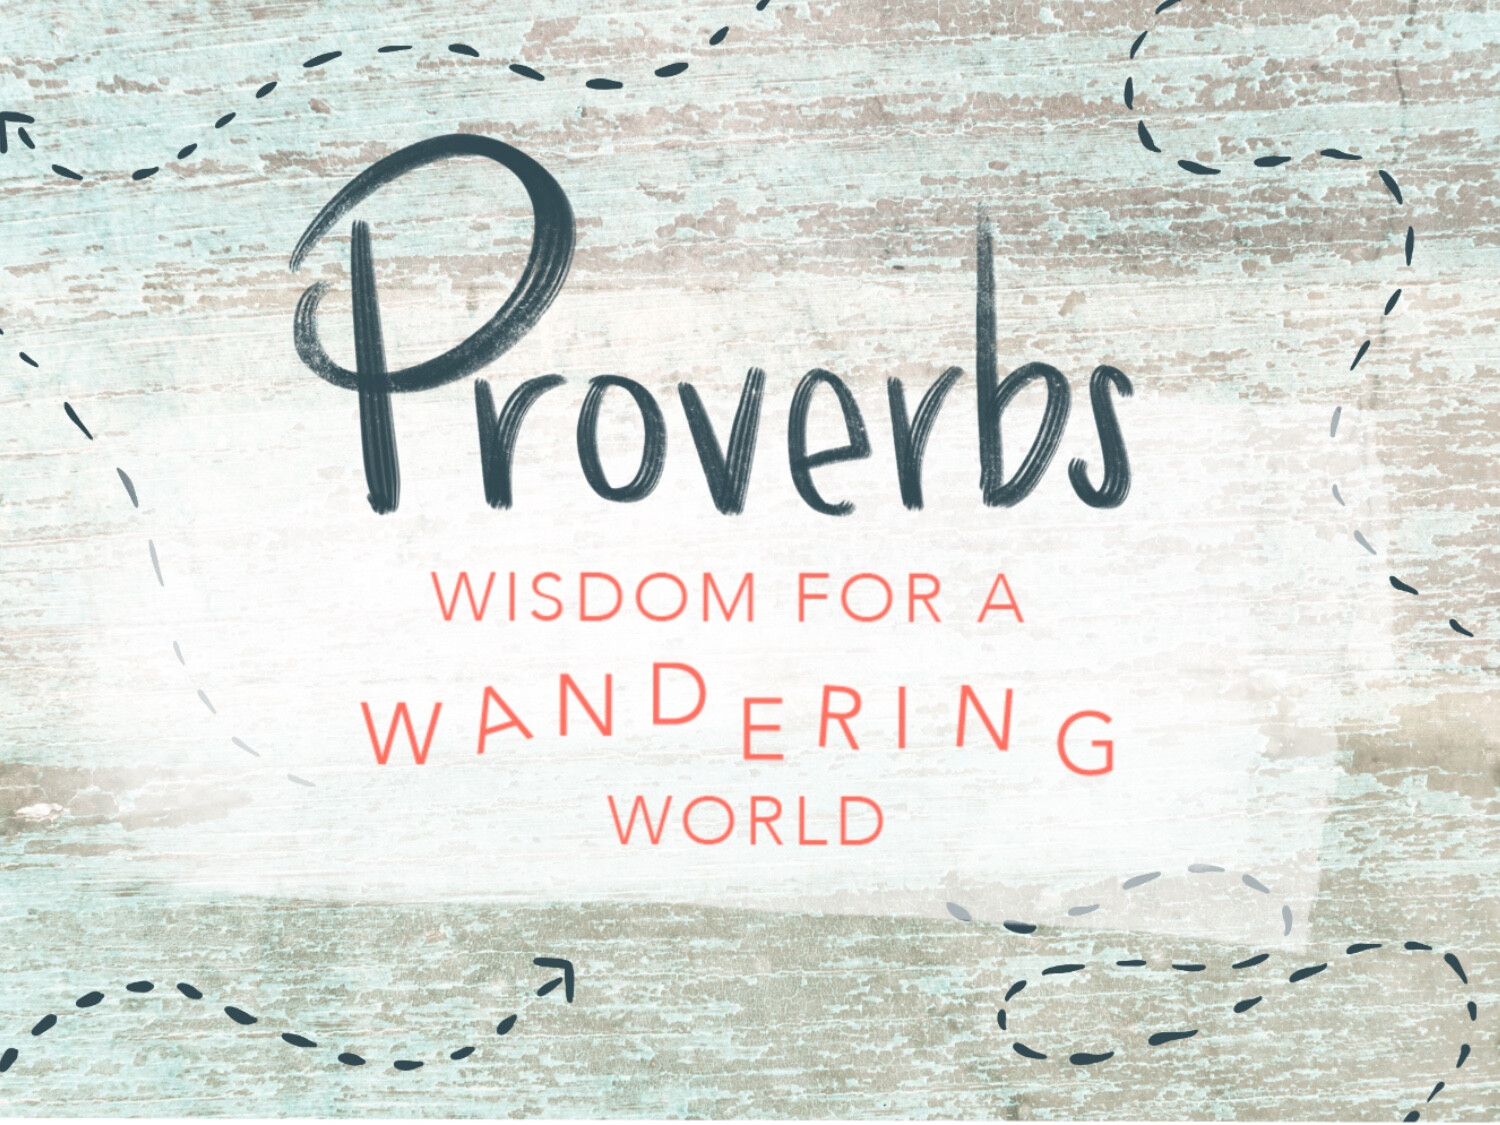 Proverbs: Wisdom for a Wandering World